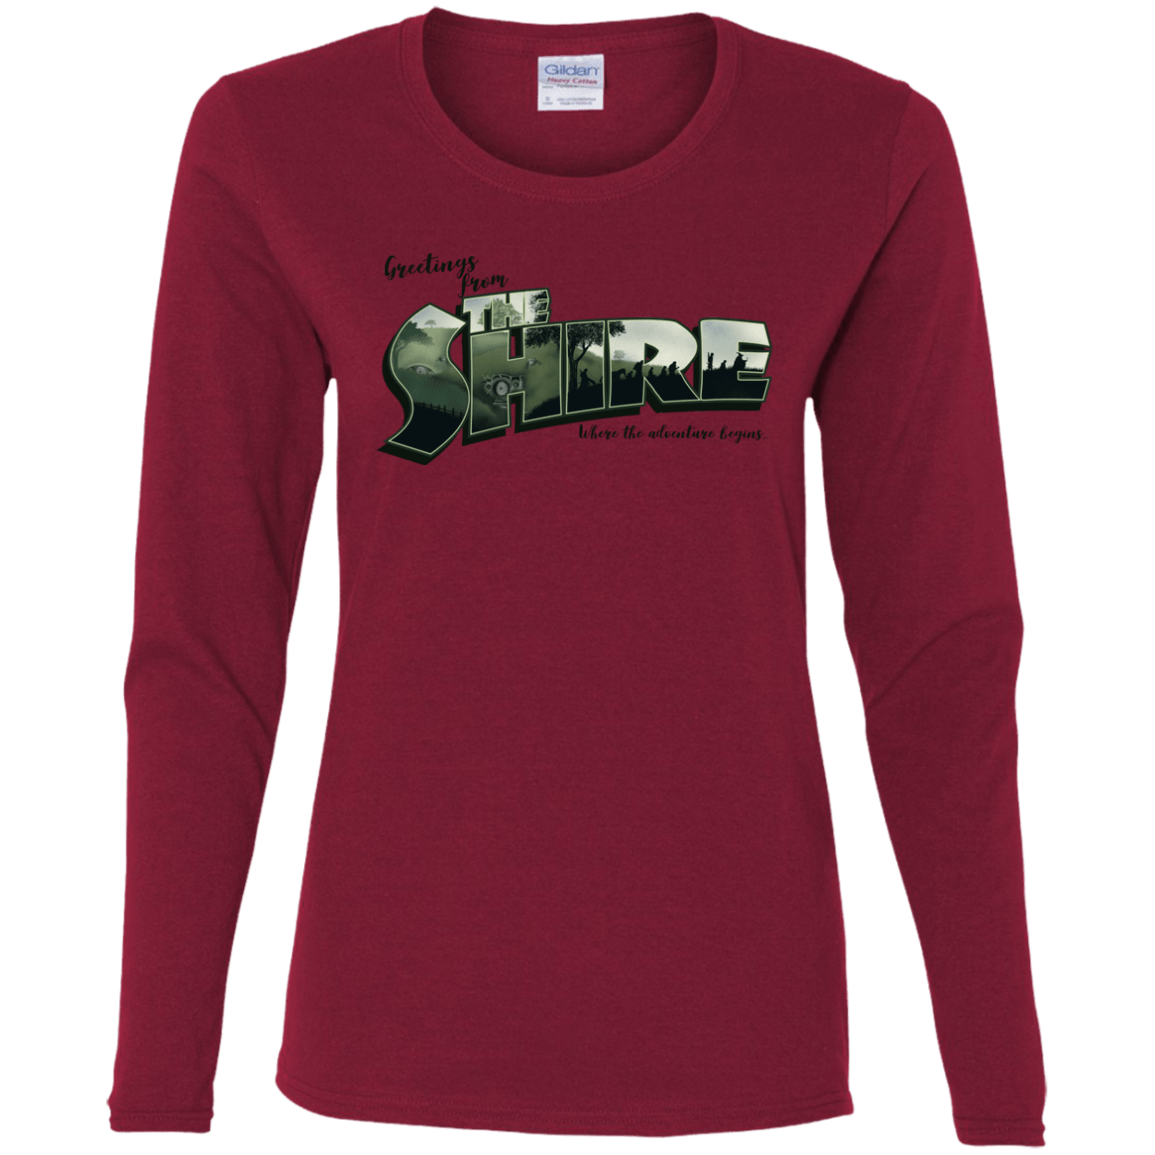 T-Shirts Cardinal / S Greetings from the Shire Women's Long Sleeve T-Shirt